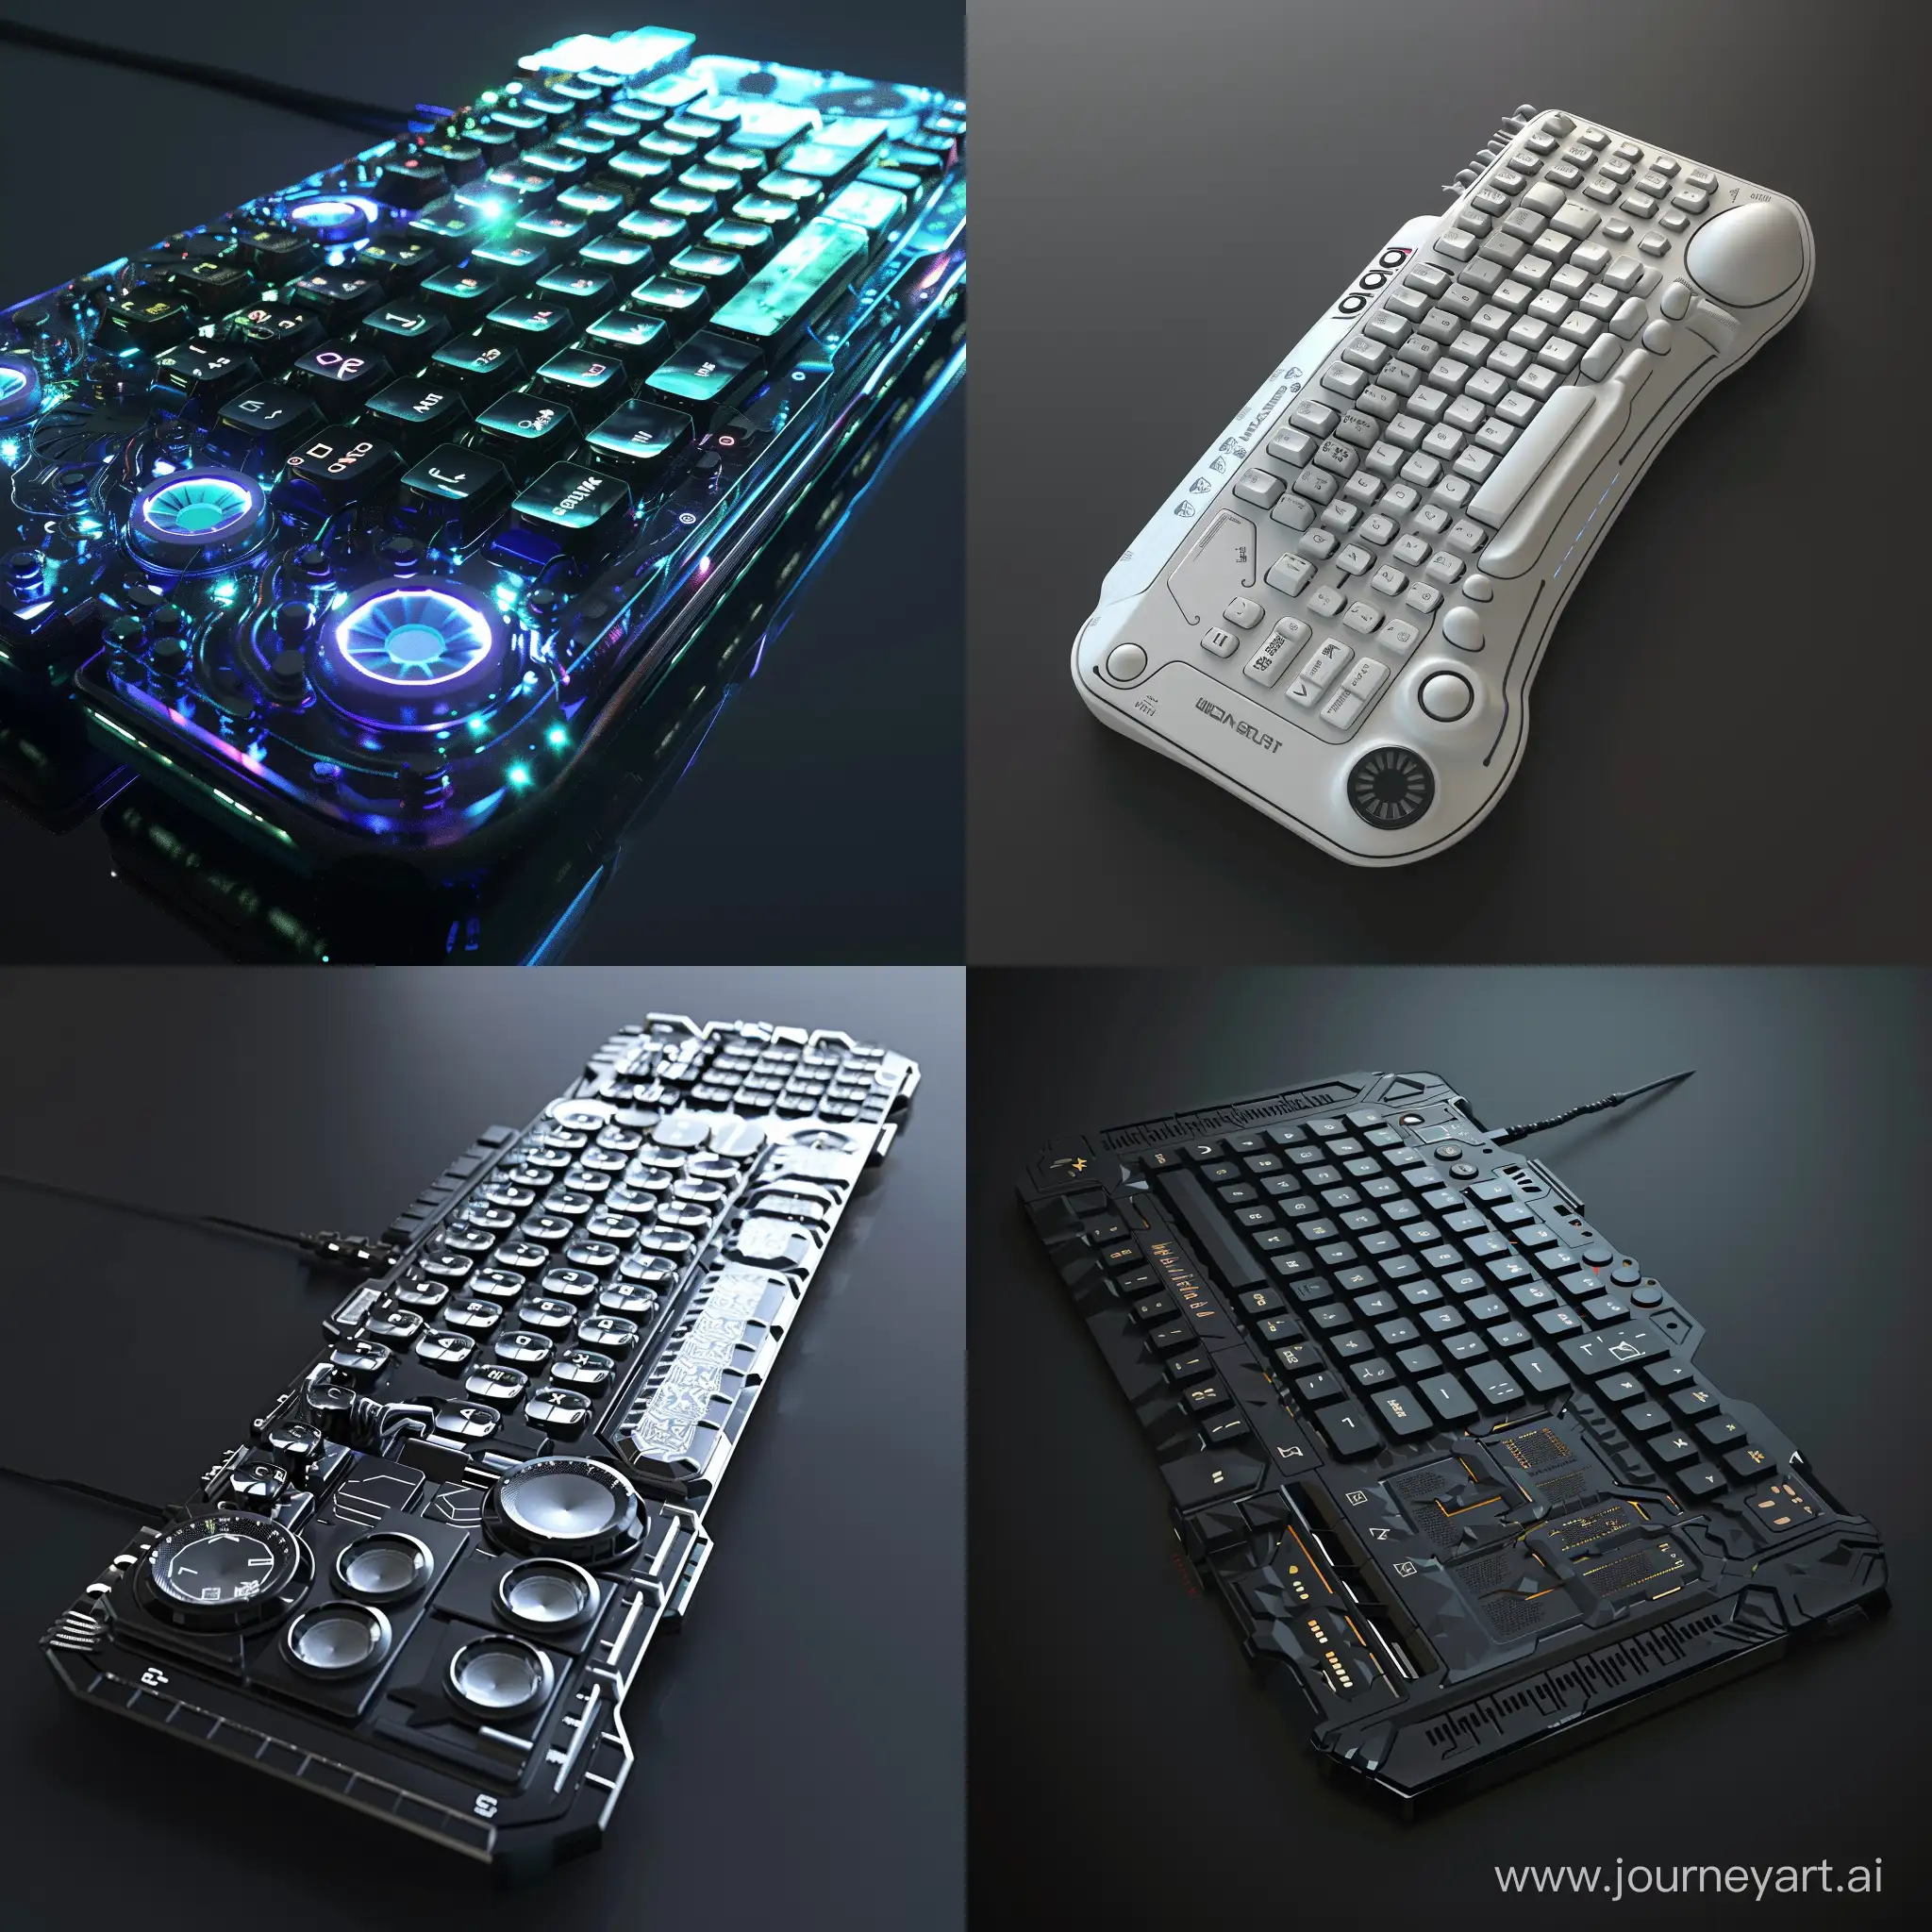 Futuristic-PC-Keyboard-Crafted-from-Recyclable-Materials-in-HighTech-World